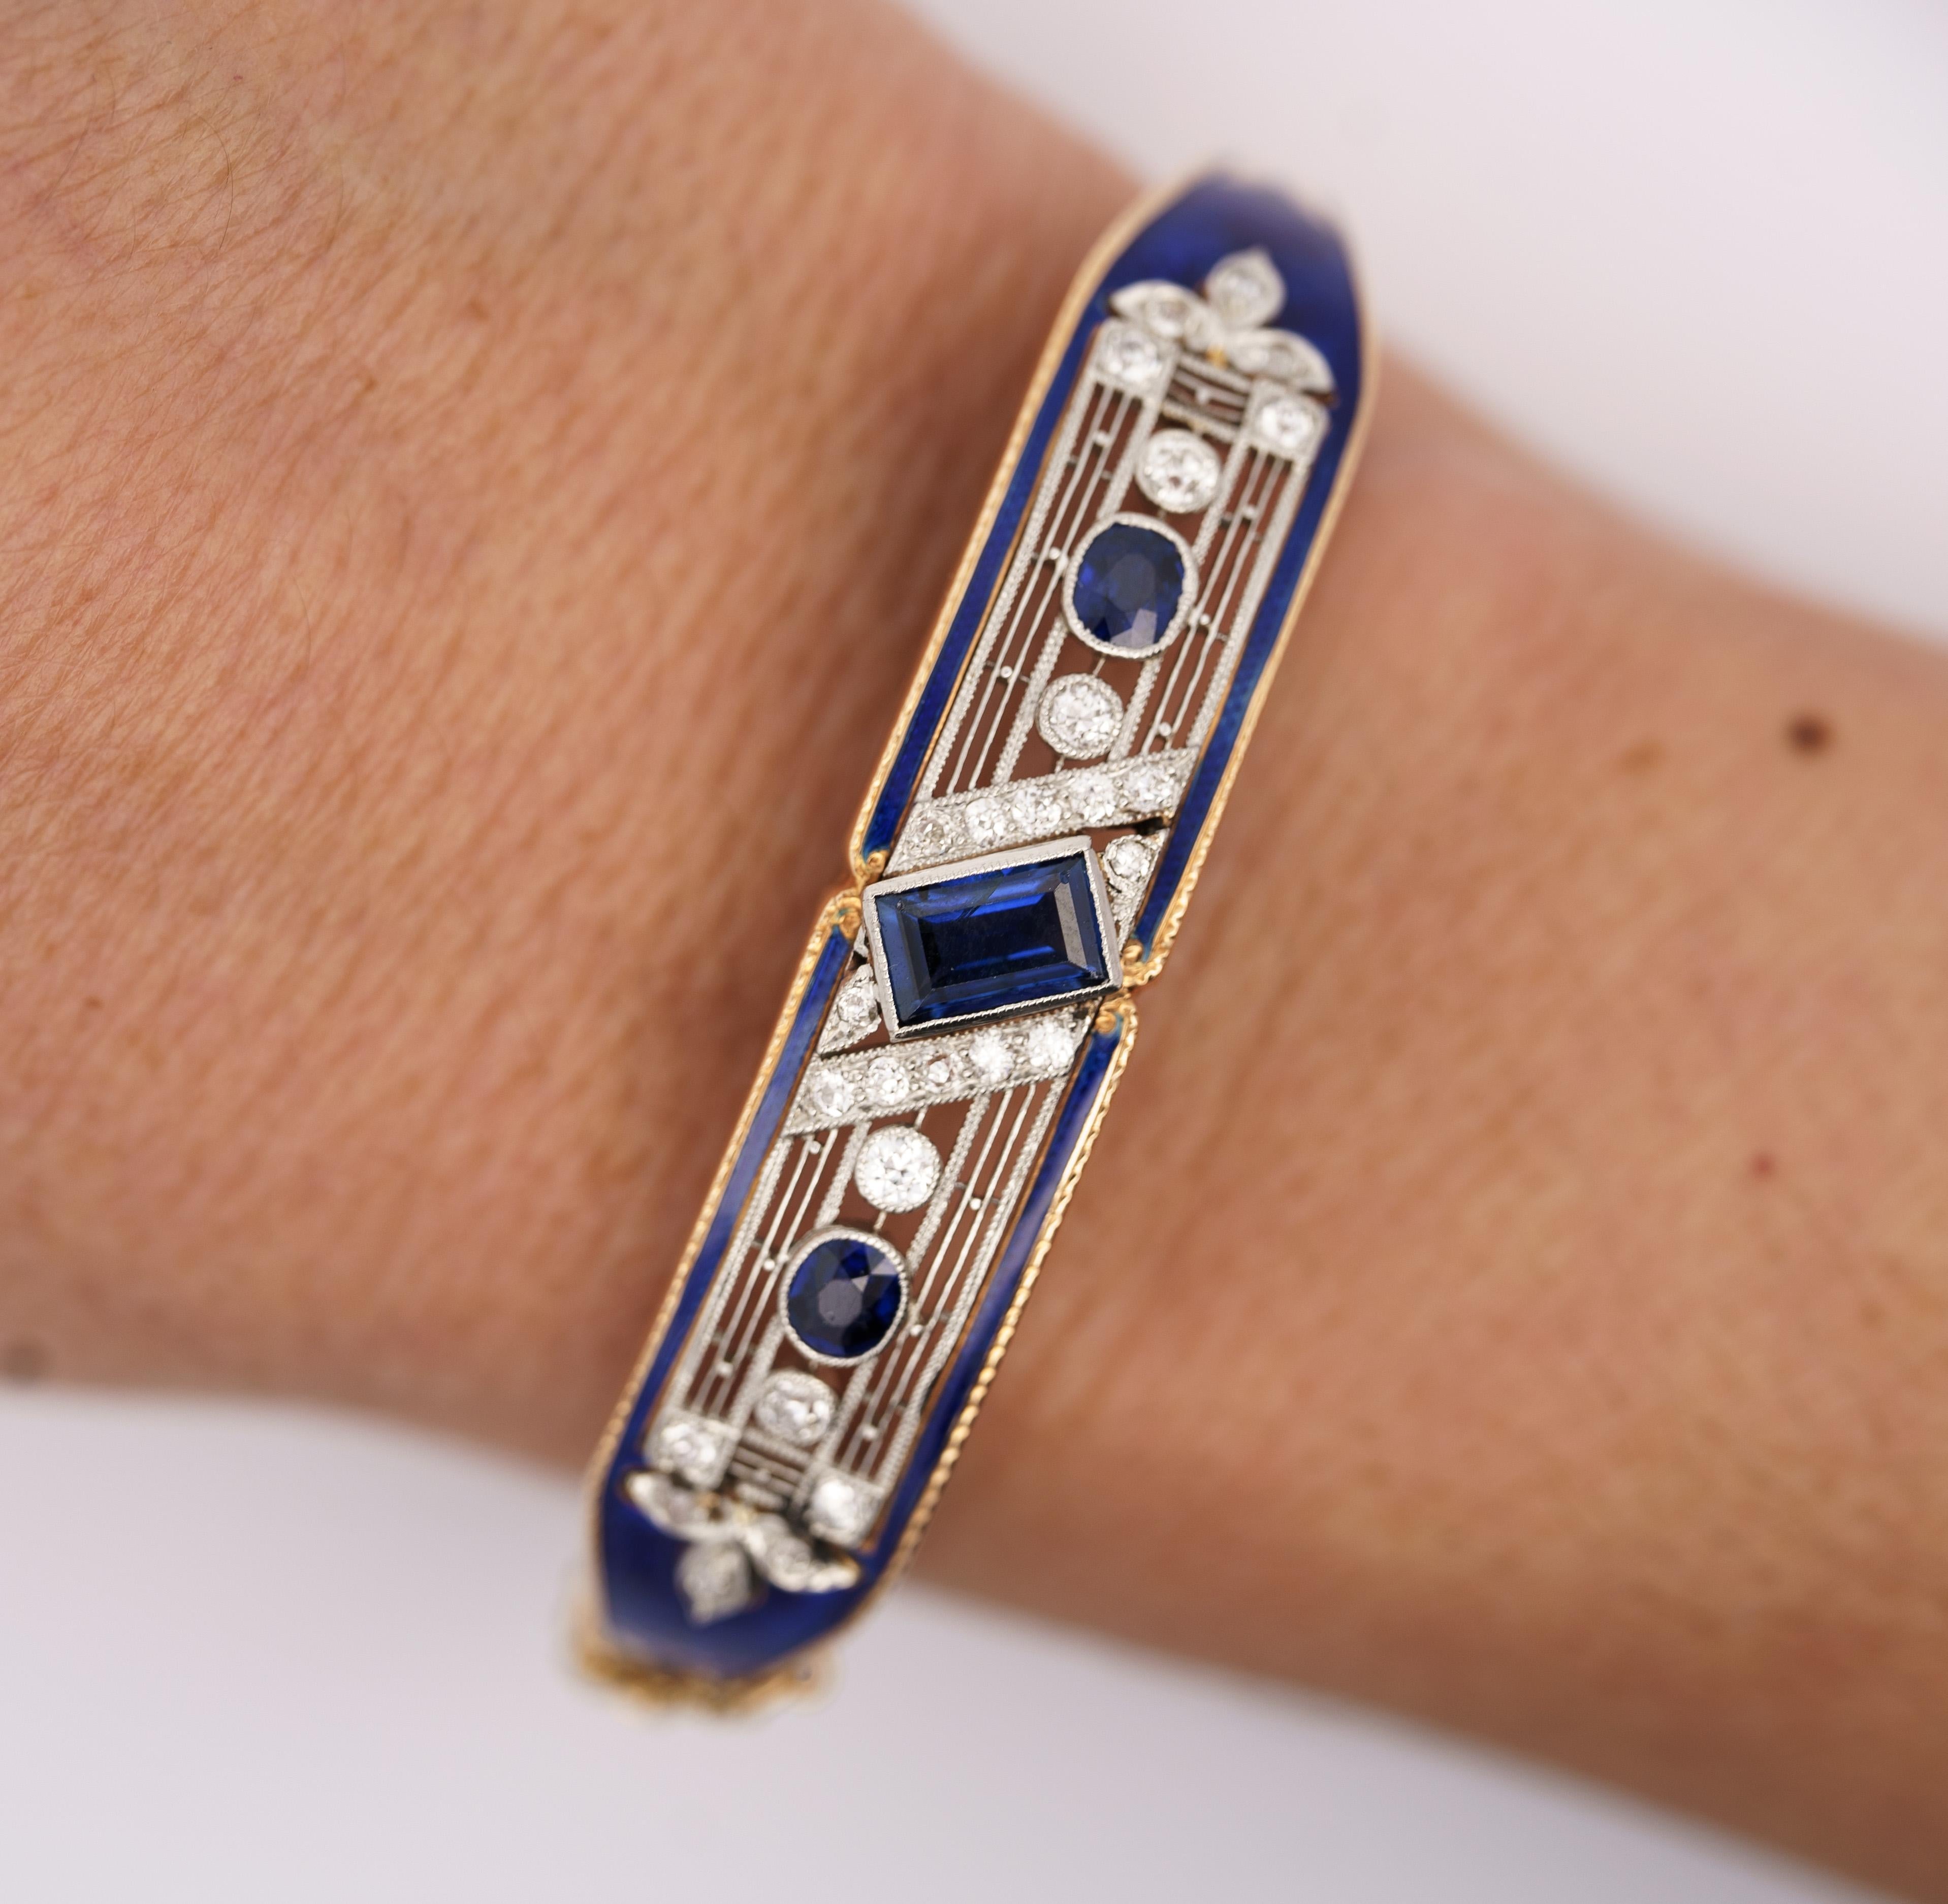 Vintage Art Deco EGL Certified 2.08 carat total natural Blue Sapphire, Diamond, and Blue Enamel bangle bracelet. 

This bangle features a 1.15 carat natural blue sapphire center stone. The sapphire is emerald step-cut, and EGL-certified. It is